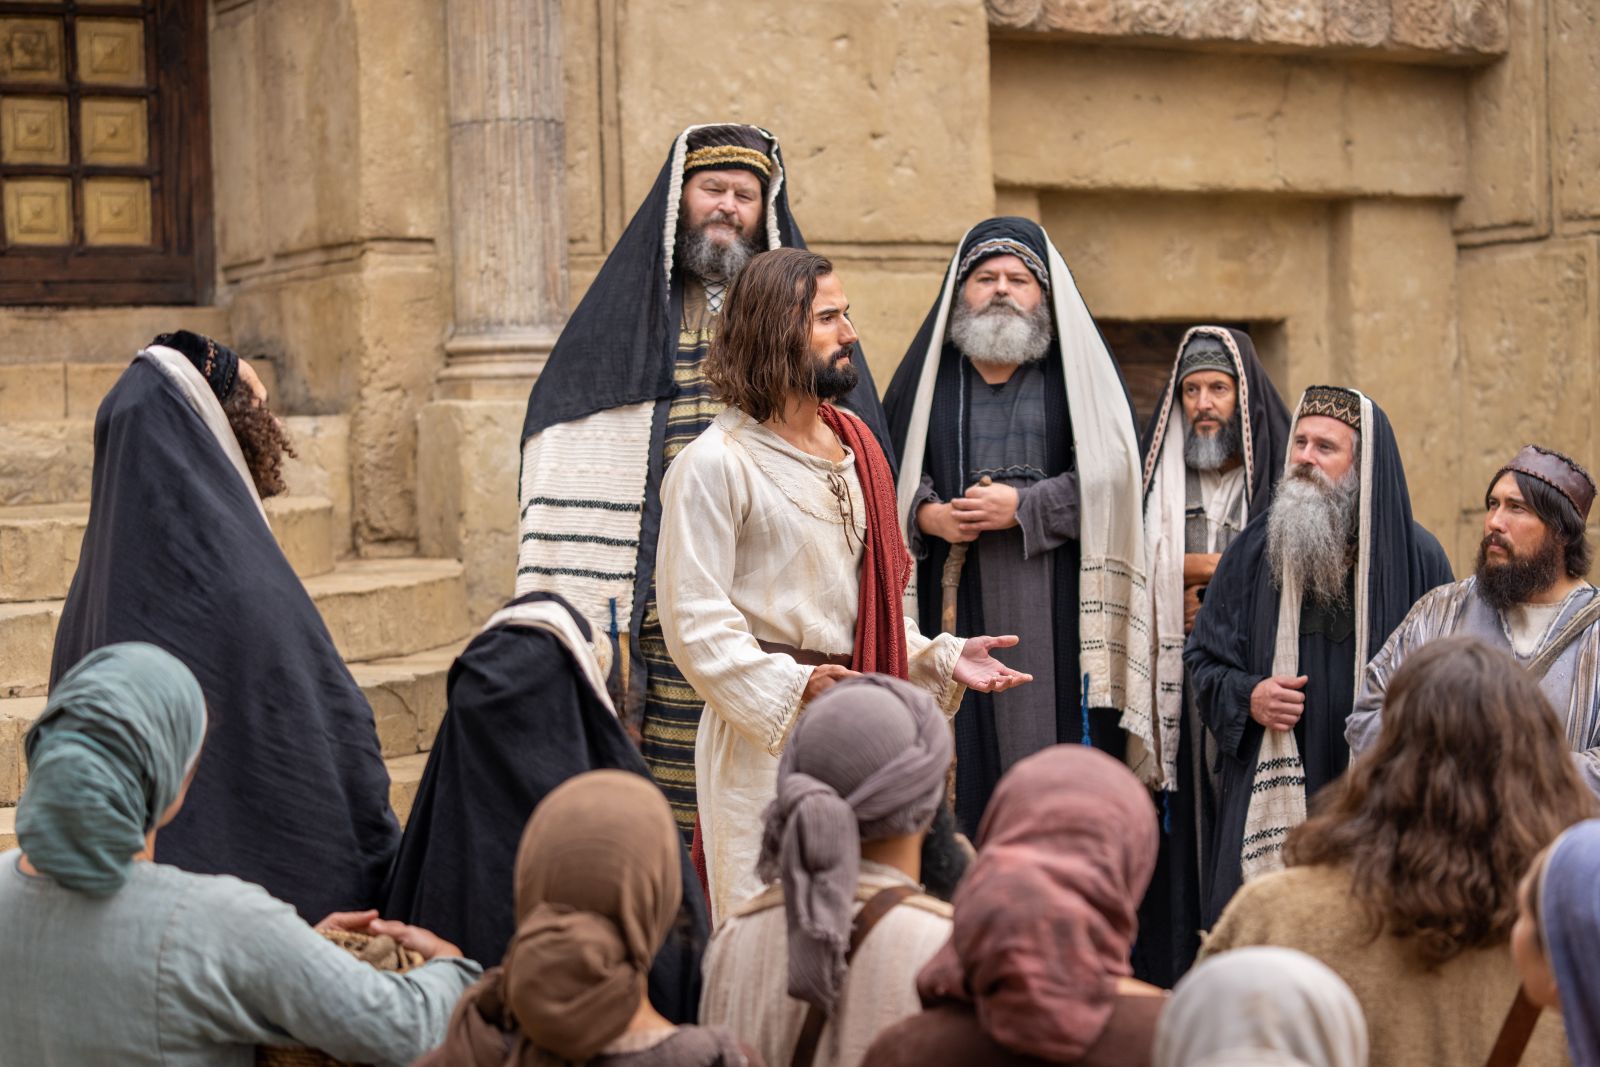 An image, taken from the Book of Mormon videos, of Christ teaching his apostles in Jerusalem in front of the Pharisees